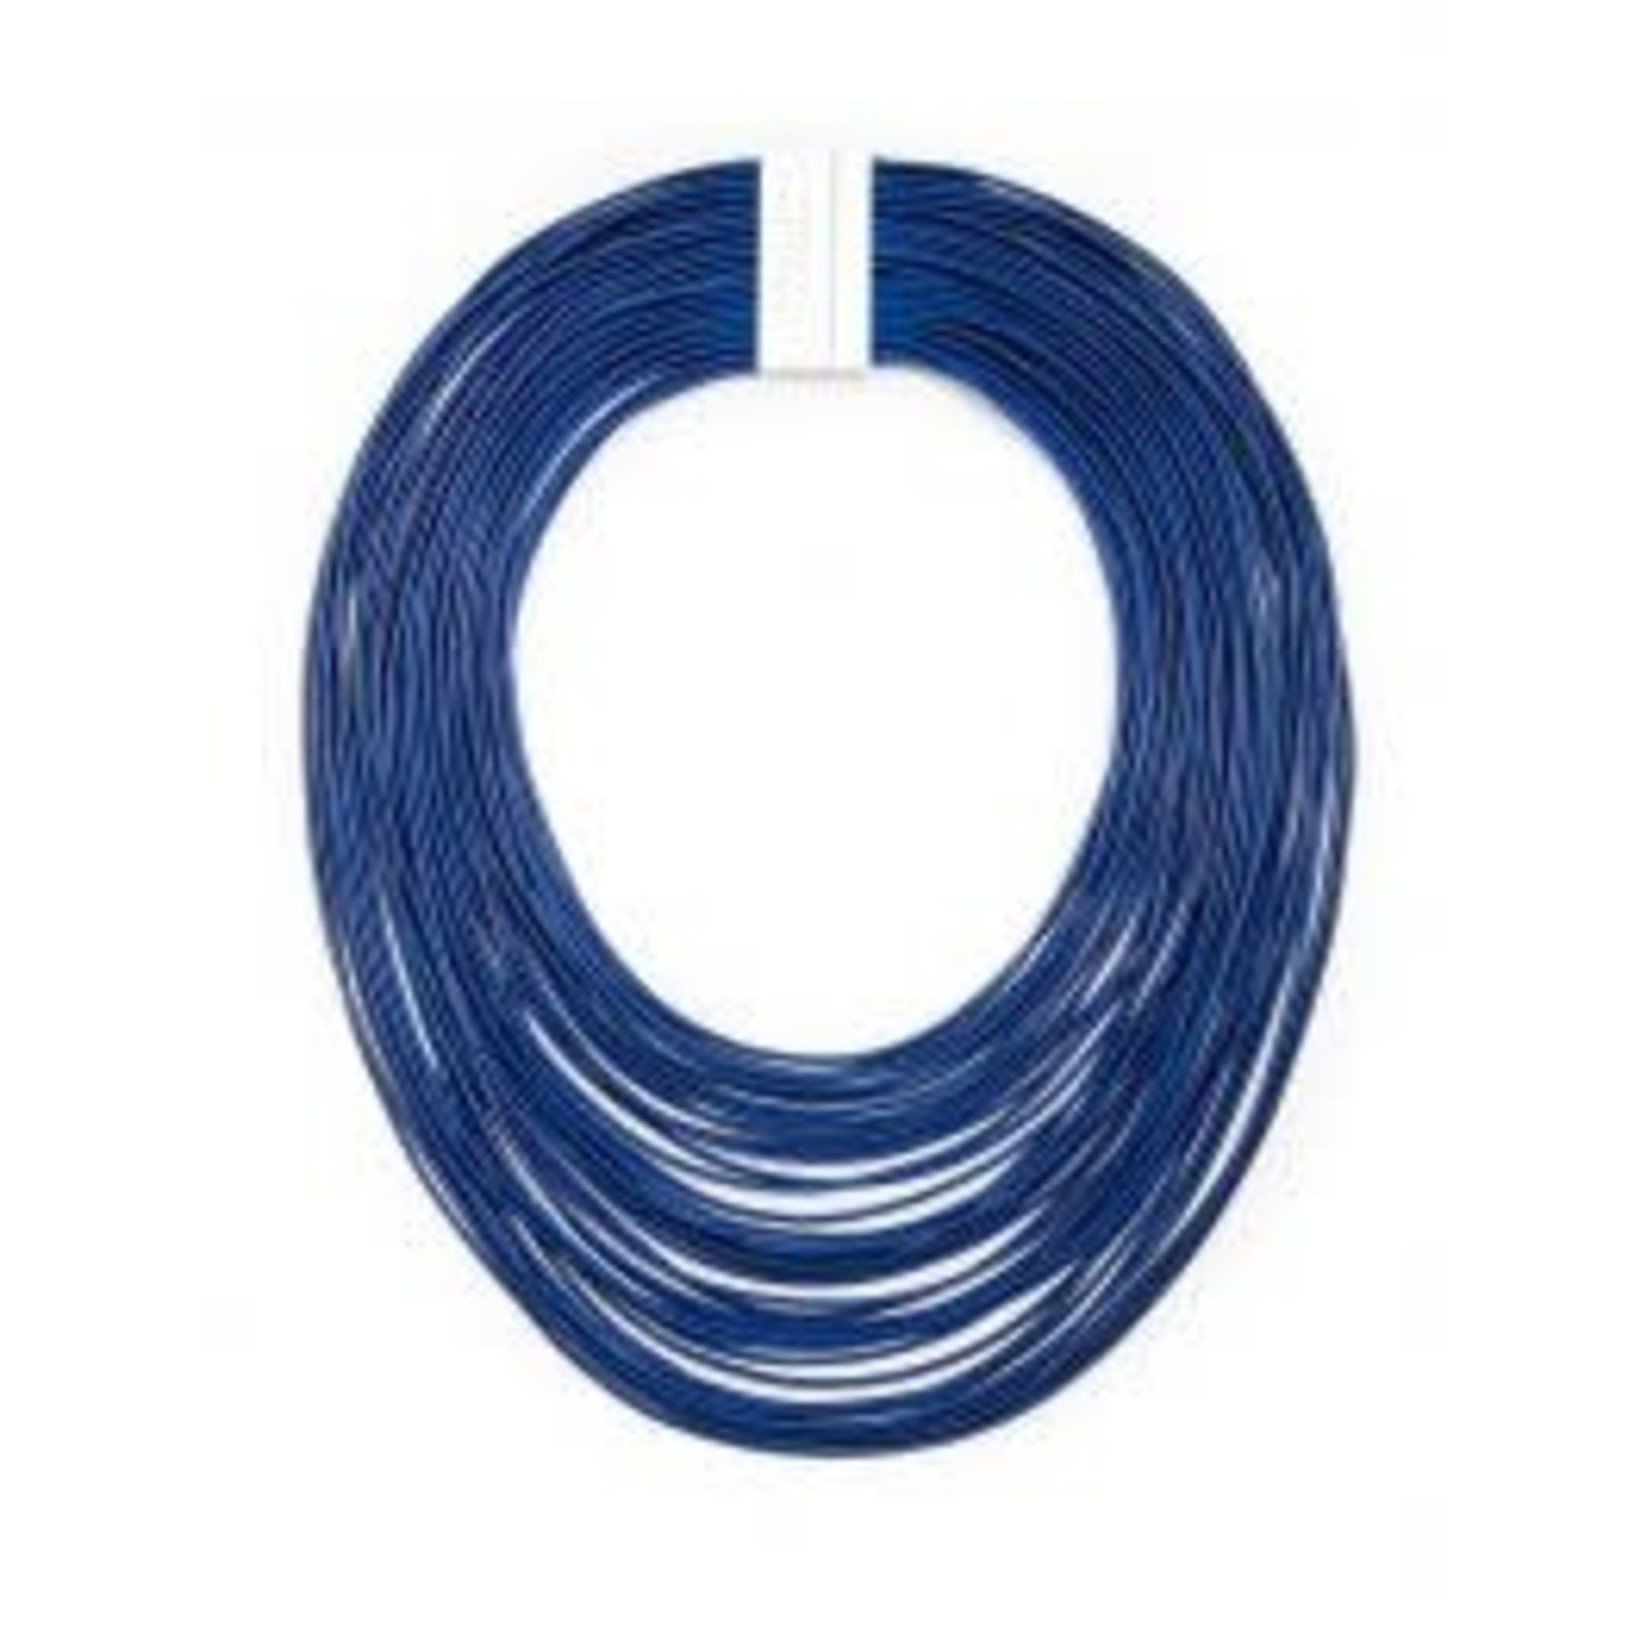 Zenzii Layered Rope Necklace in Navy